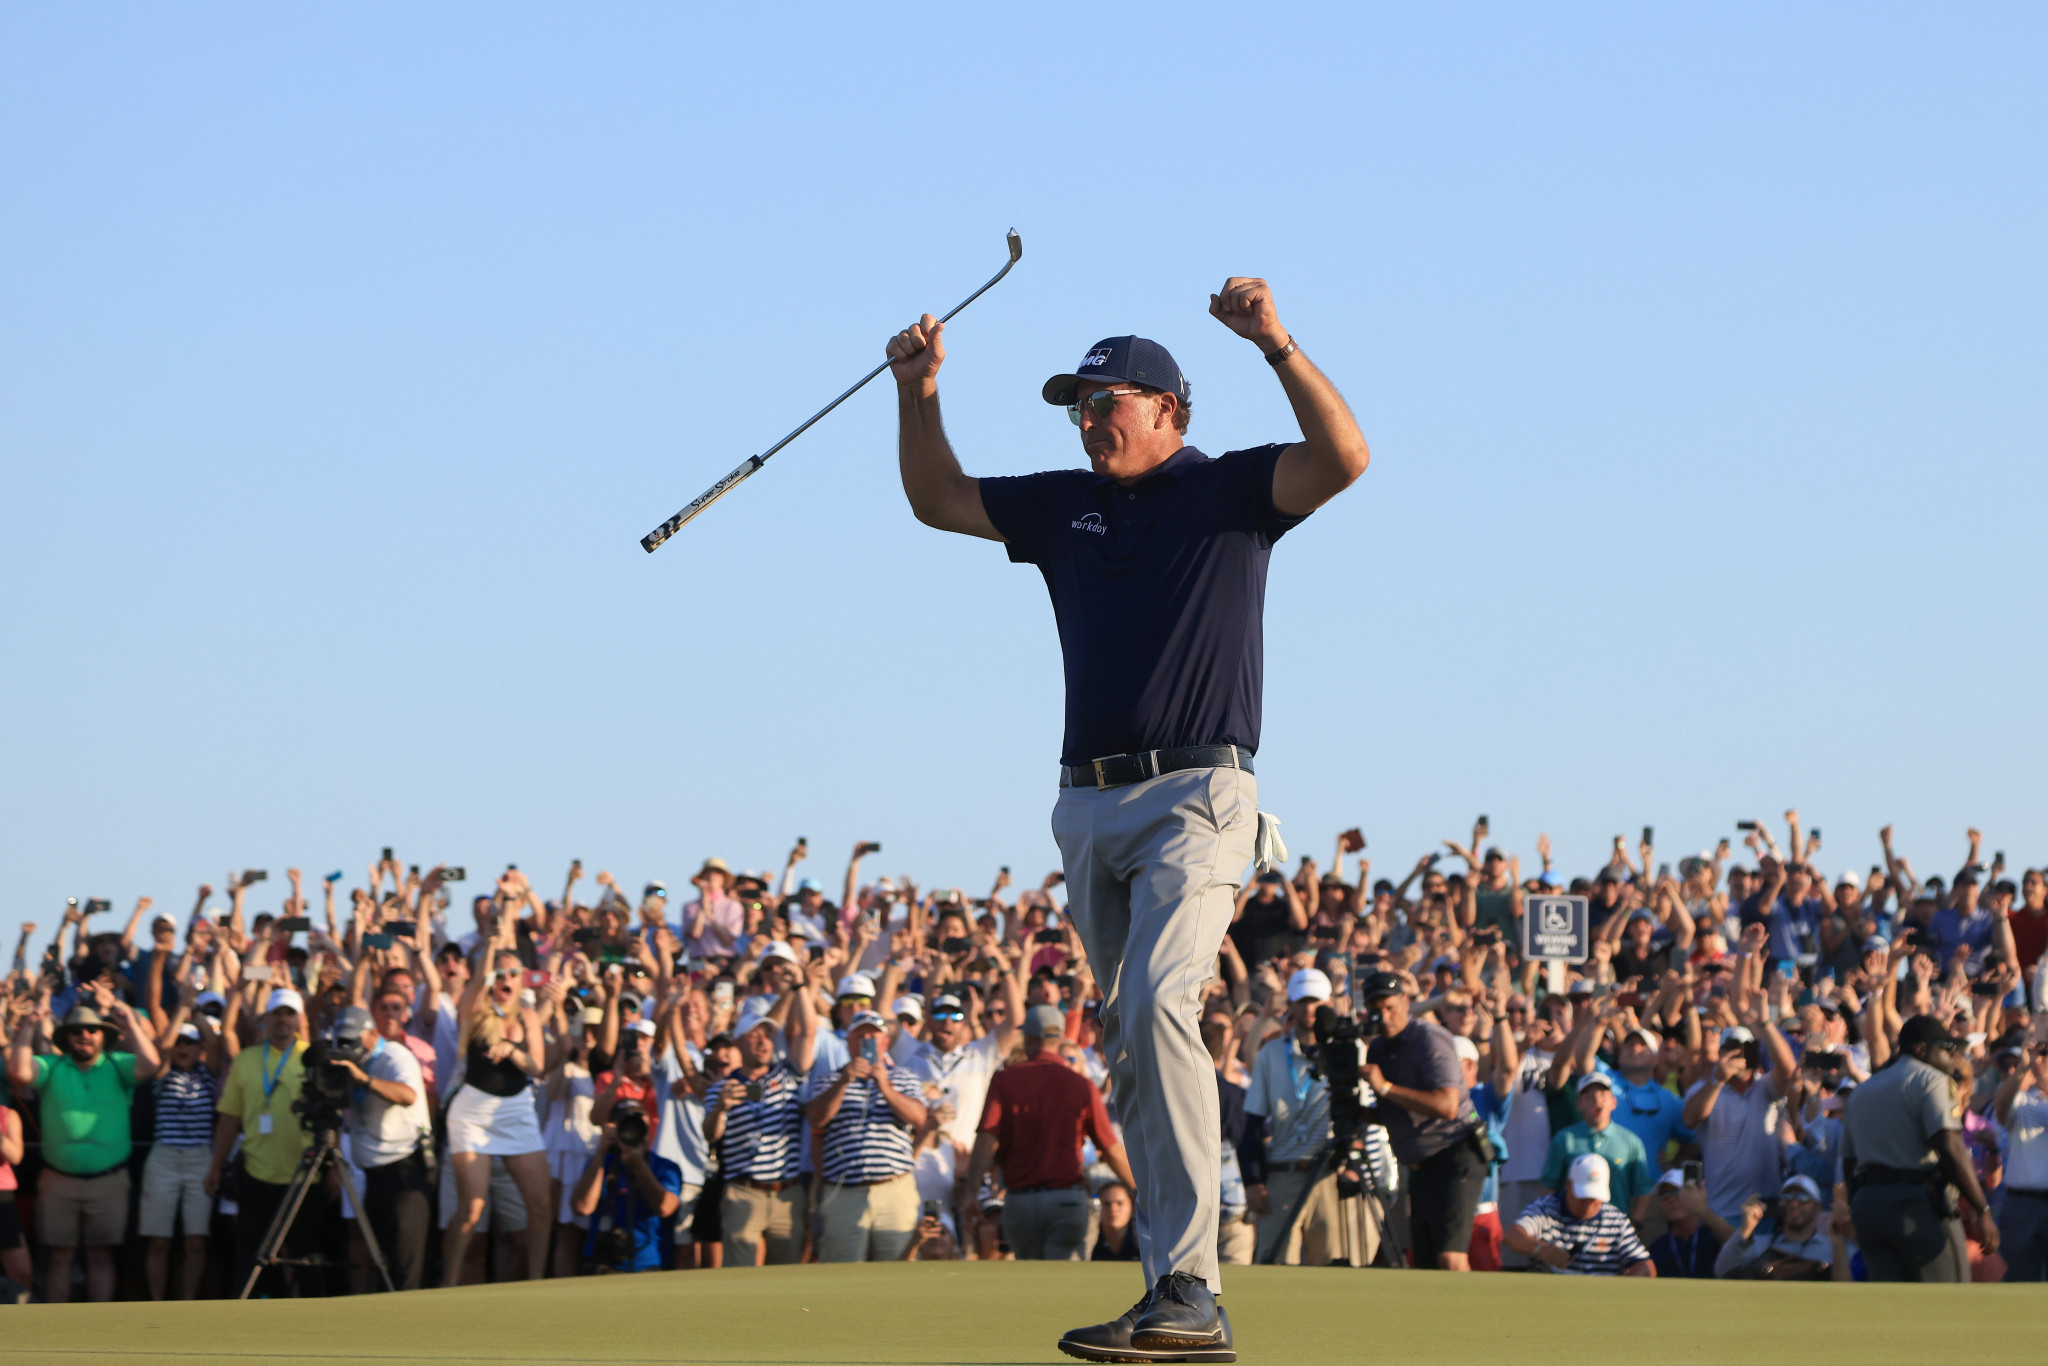 Cool-headed Mickelson wins PGA Championship to become golf's oldest major champion